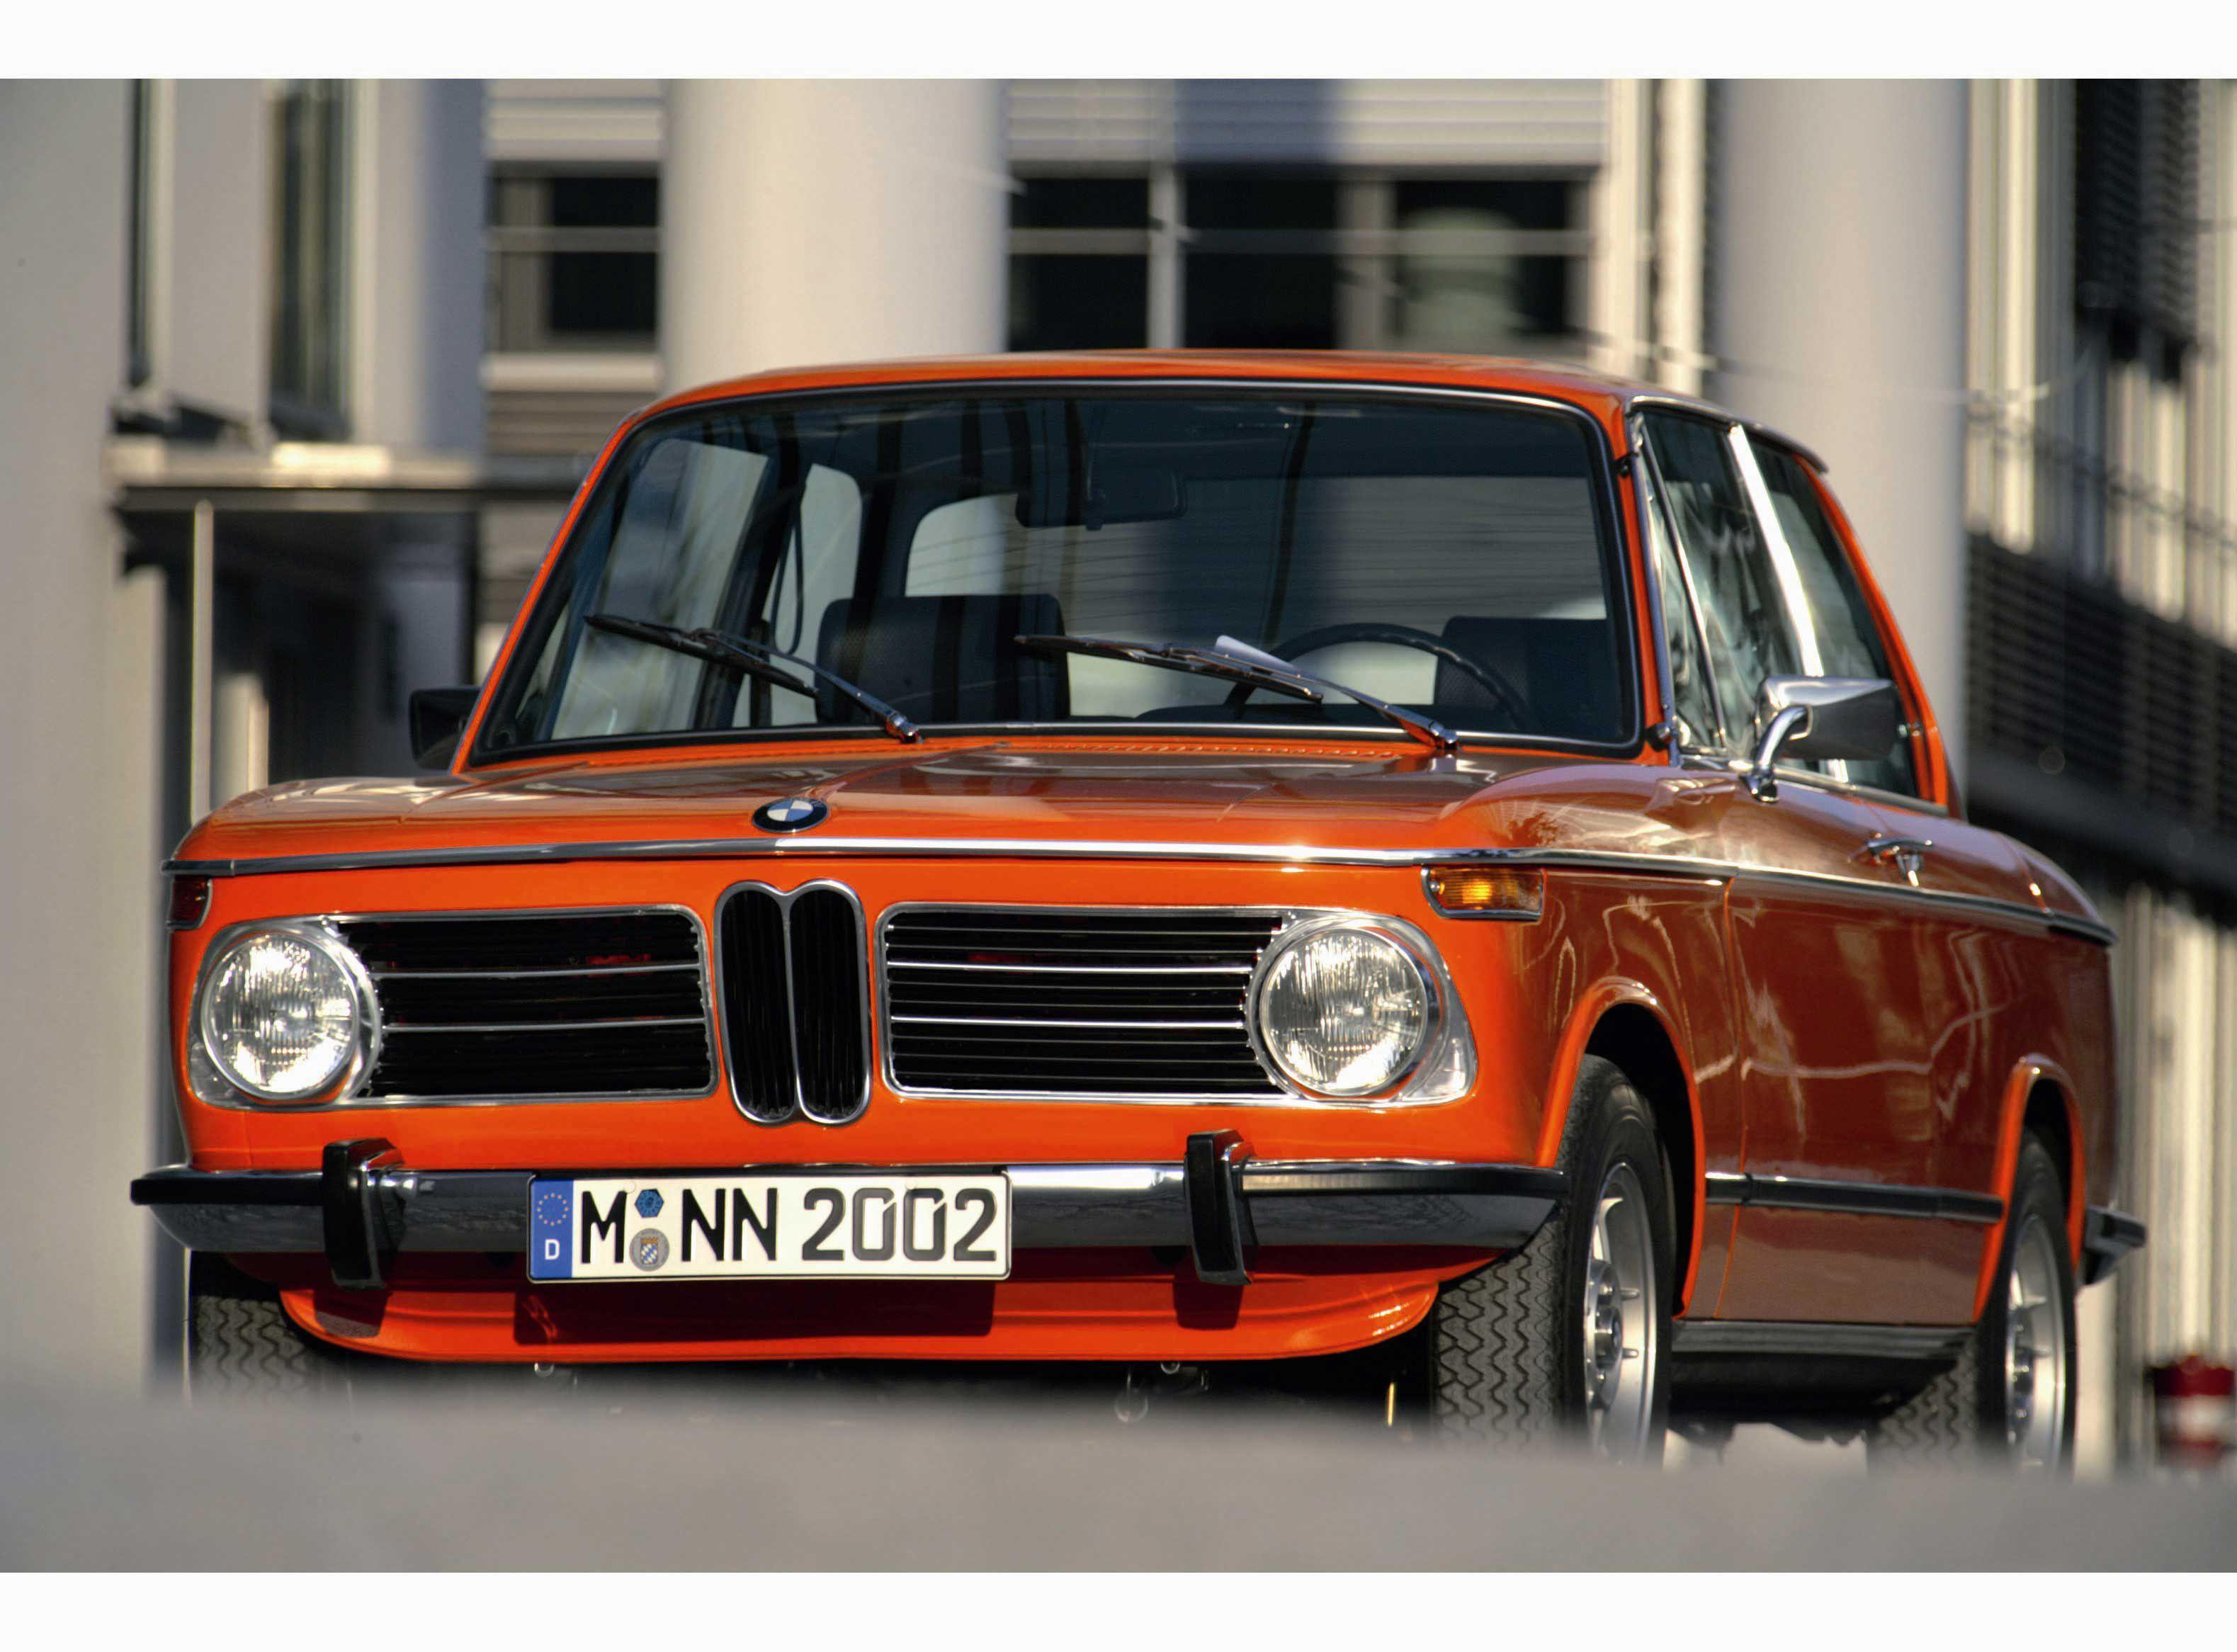 Bmw 2002 Photo and Wallpaper